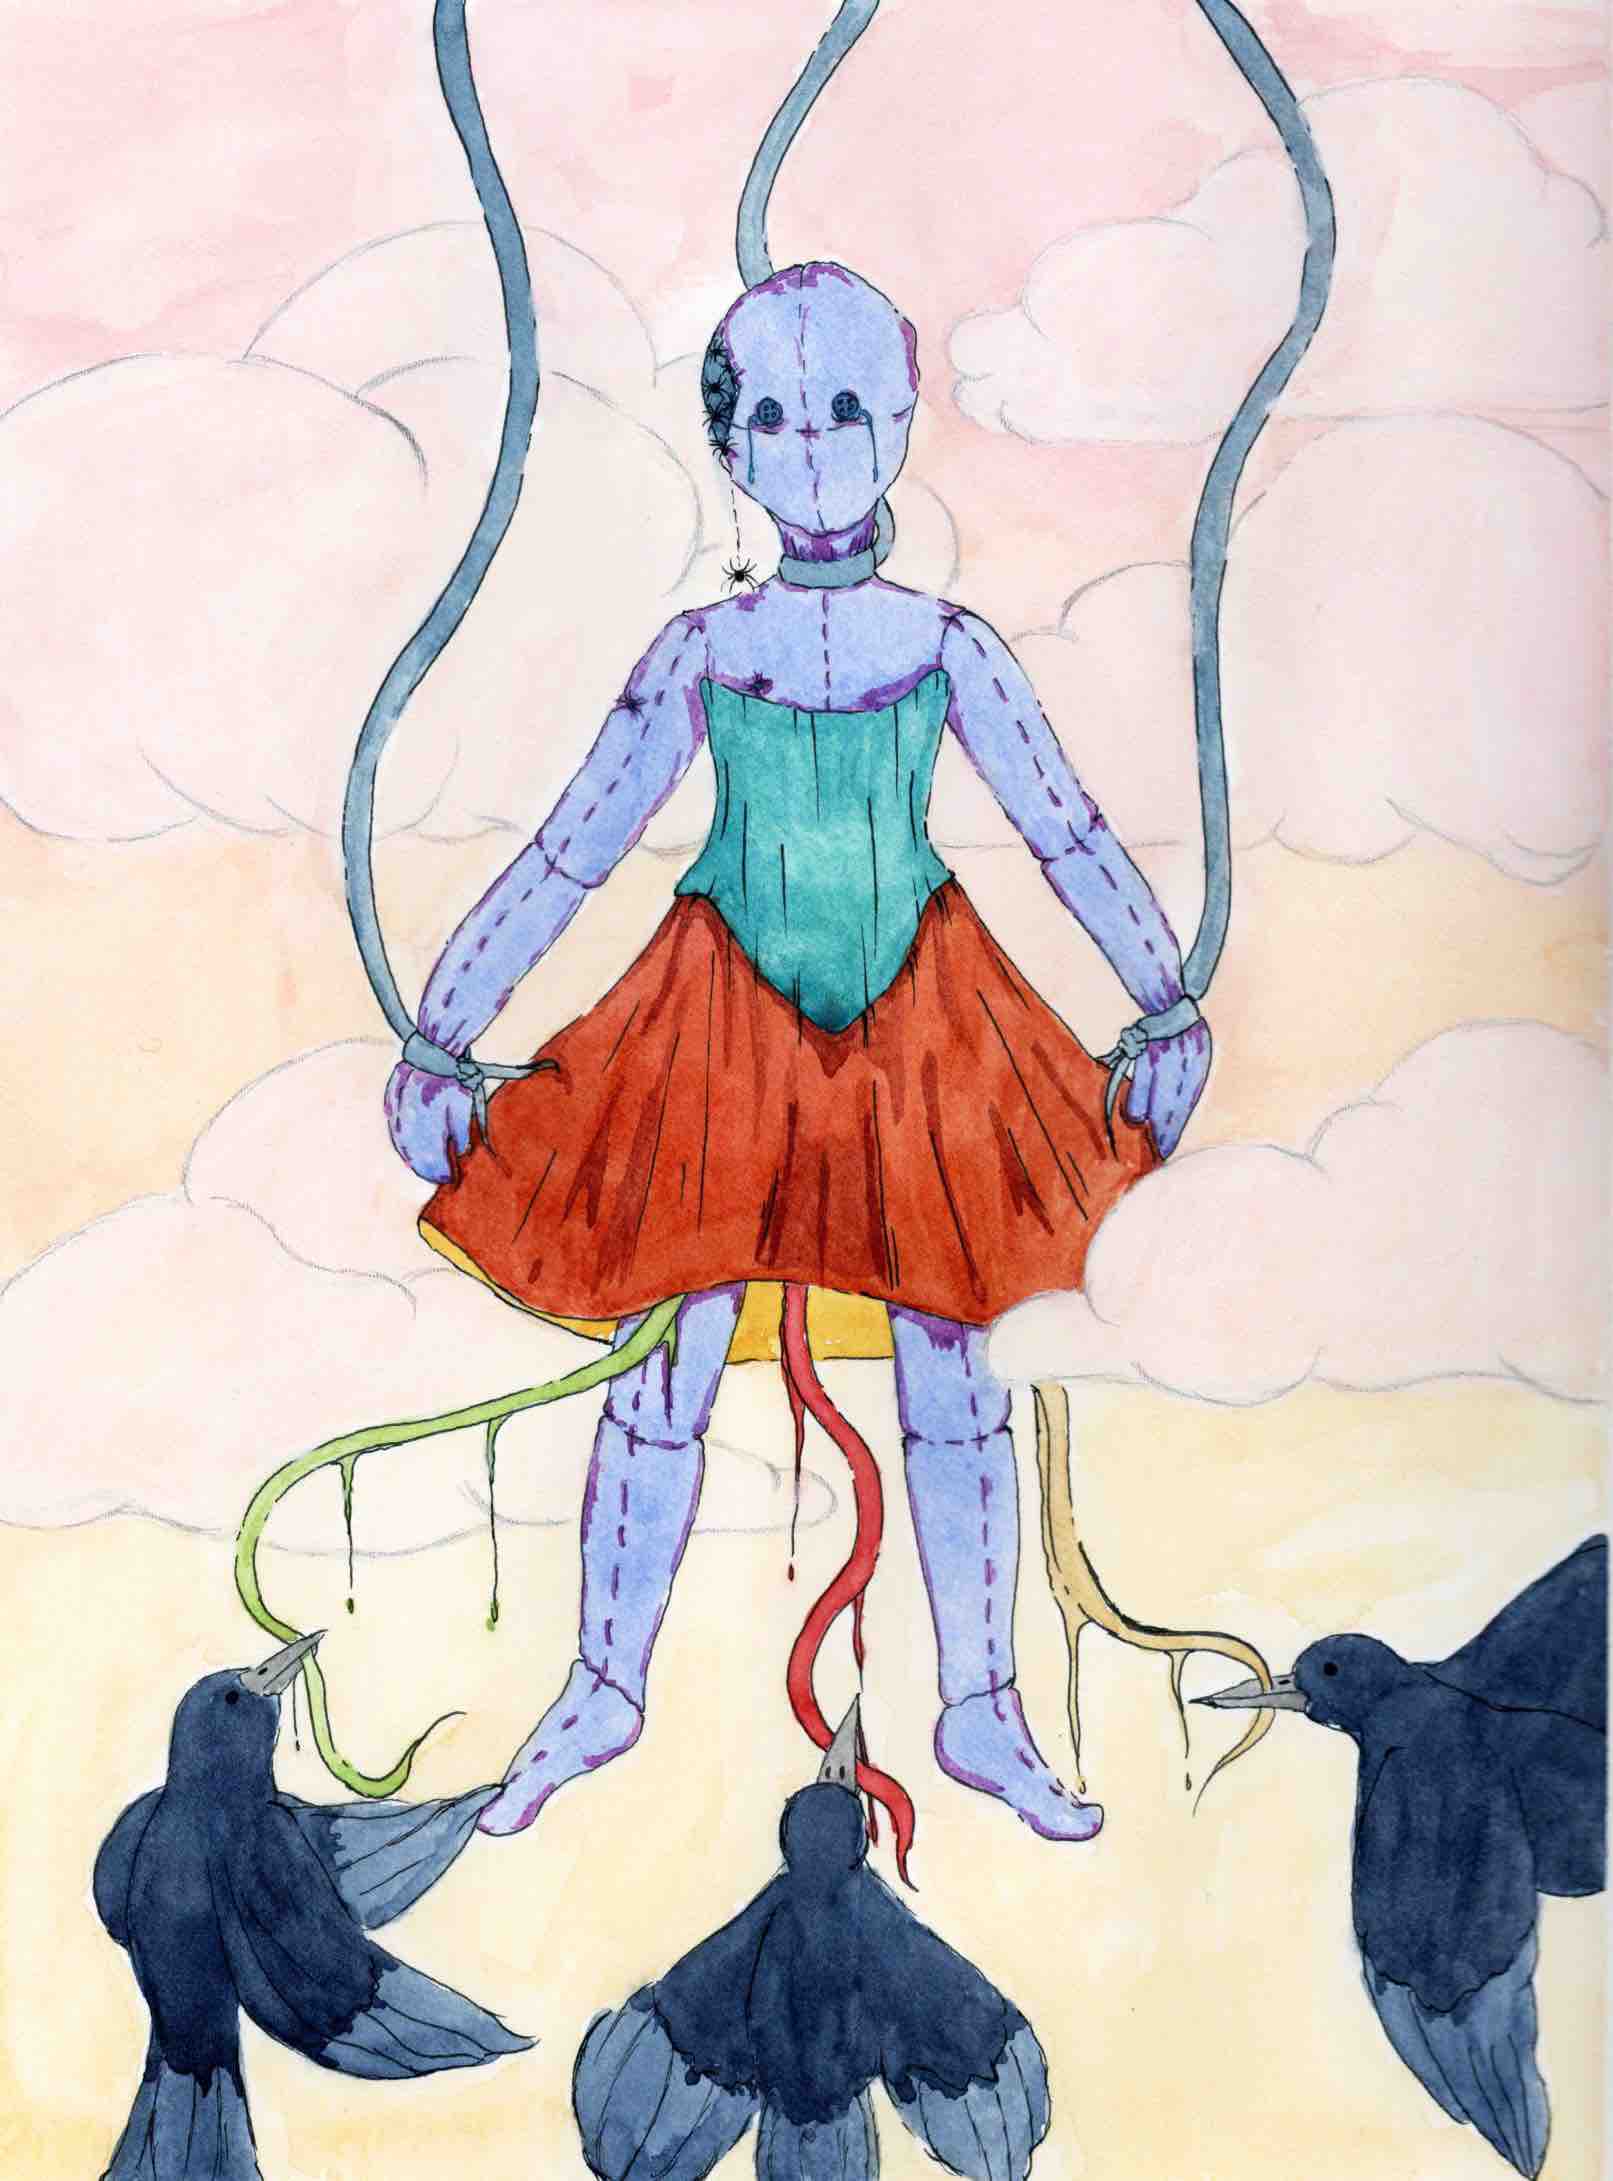 This is a pen drawing colourized with watercolour, guache, and coloured pencil. The background is a pale peach, rose, and yellow sky, with chubby white clouds floating serenely. Contrasting with the serenity of the background is a figure, front and centre. The figure appears to be a doll-puppet, with light blue ‘flesh’ and visible sewing seams. The only facial features on the bald head are two eyes; a tear rolls down from each. From a defect in the skull, a family of spiders emerges and descends to the shoulder. The figure is wearing a plain teal corset and orange skirt. Ribbons from the top of the image are attached at the neck and wrists, mirroring tendrils emerging from between the legs, which are held in the mouths of three dark birds at the bottom of the scene.